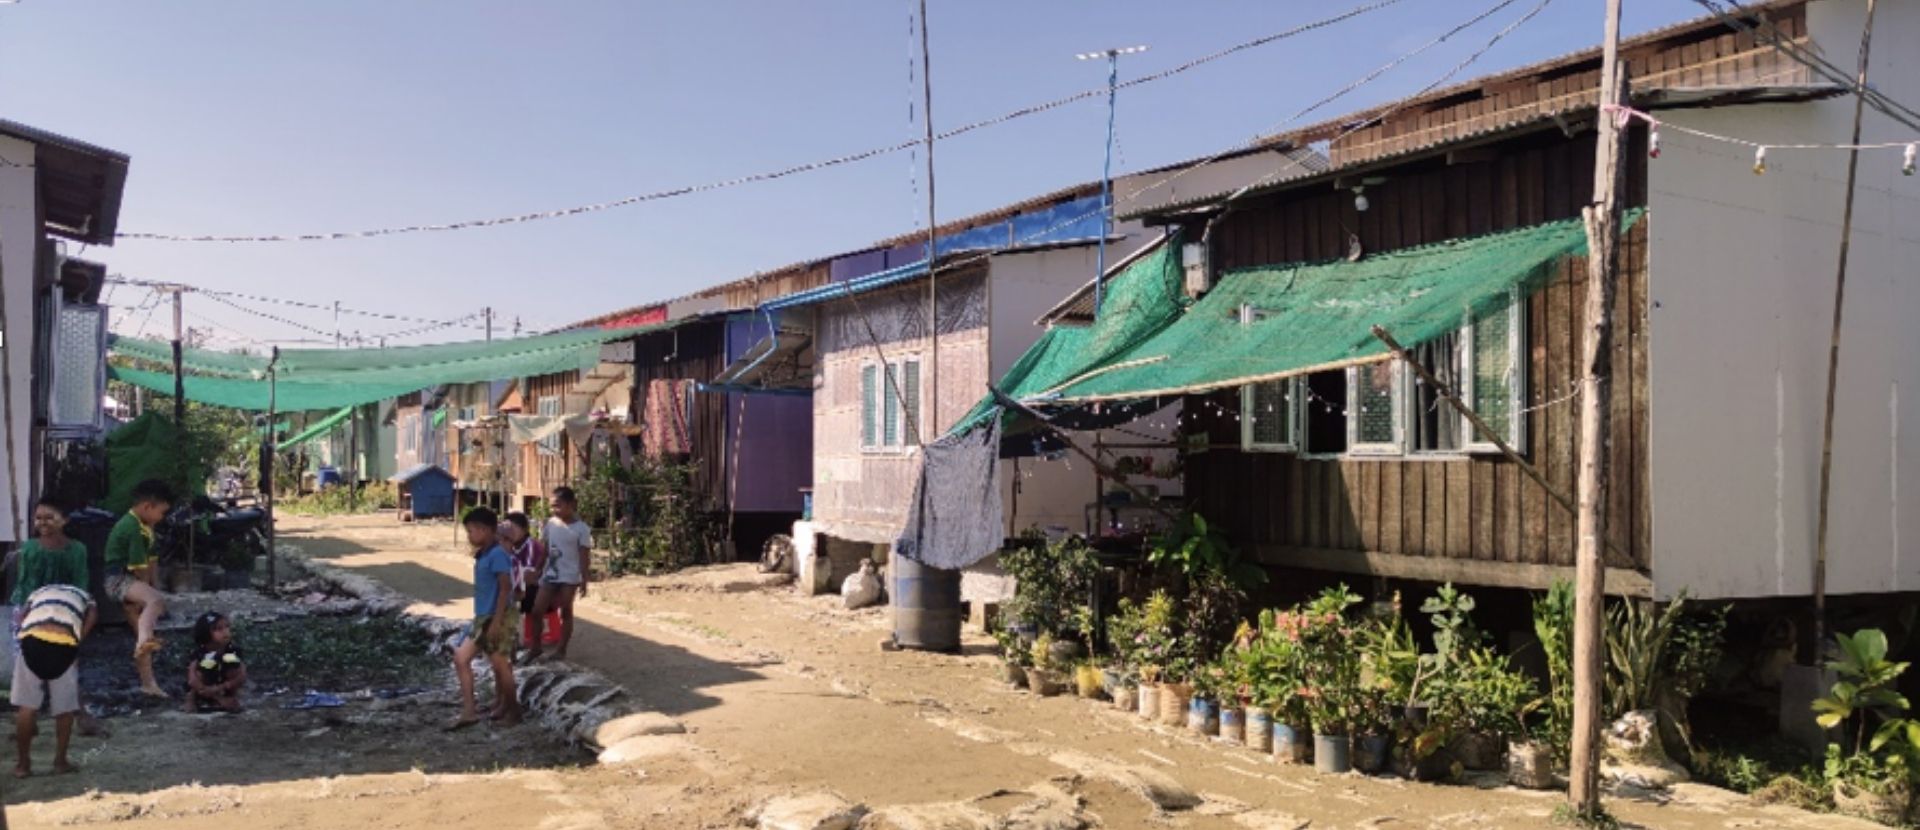 Collective housing projects in the outskirts of Yangon by Marina Kolovou Kouri-